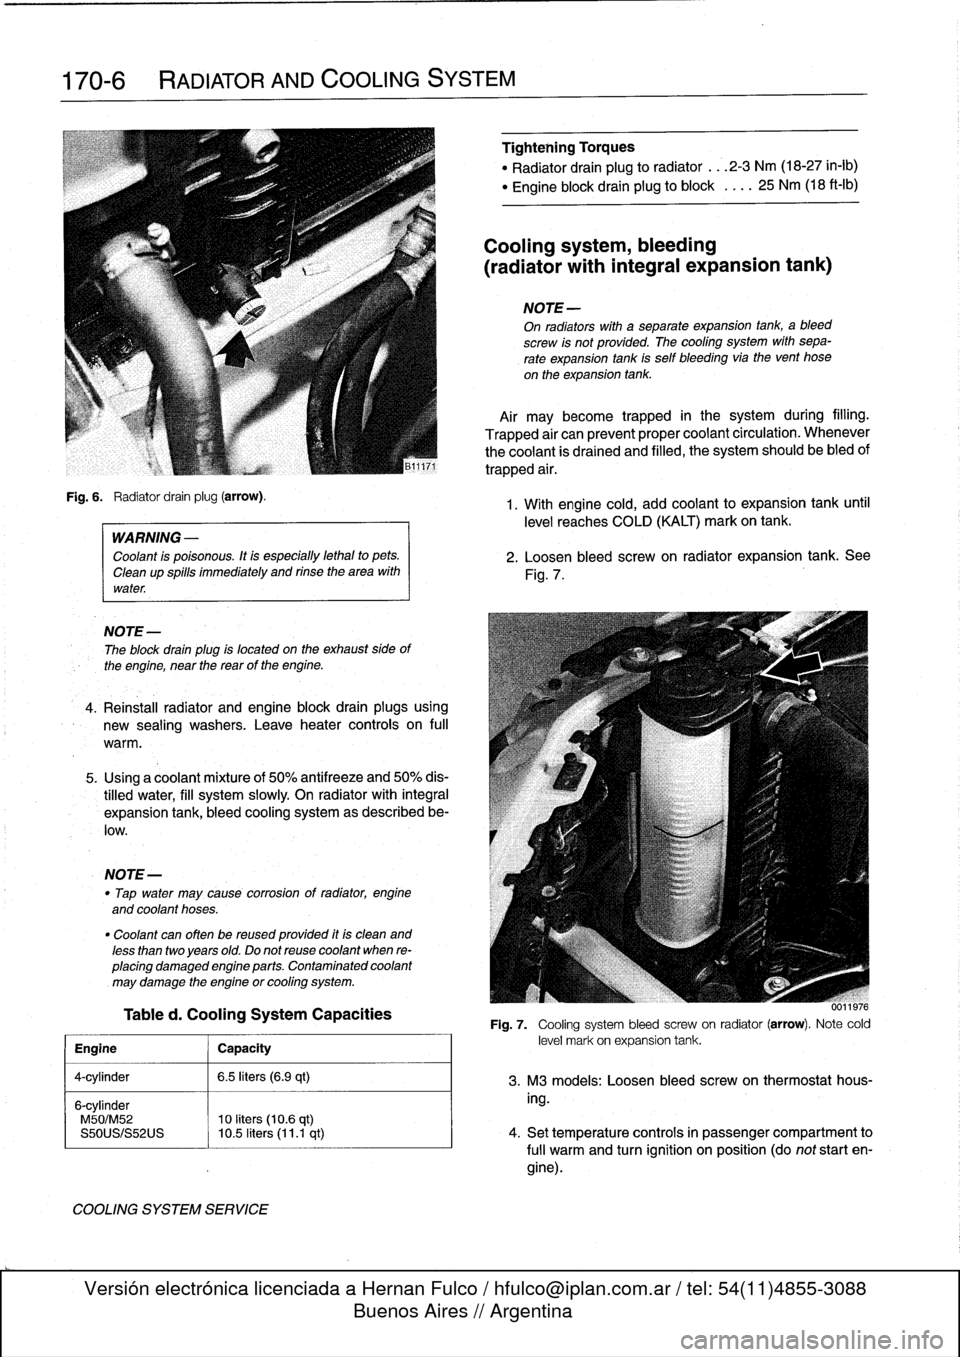 BMW 318i 1992 E36 Workshop Manual 
170-6

	

RADIATOR
AND
COOLING
SYSTEM

Fig
.
6
.

	

Radiator
drain
plug
(arrow)
.

WARNING
-

Coolant
is
poisonous
.
Itis
especially
lethal
to
pets
.

Cleanup
spills
immediately
and
rinse
the
area
w